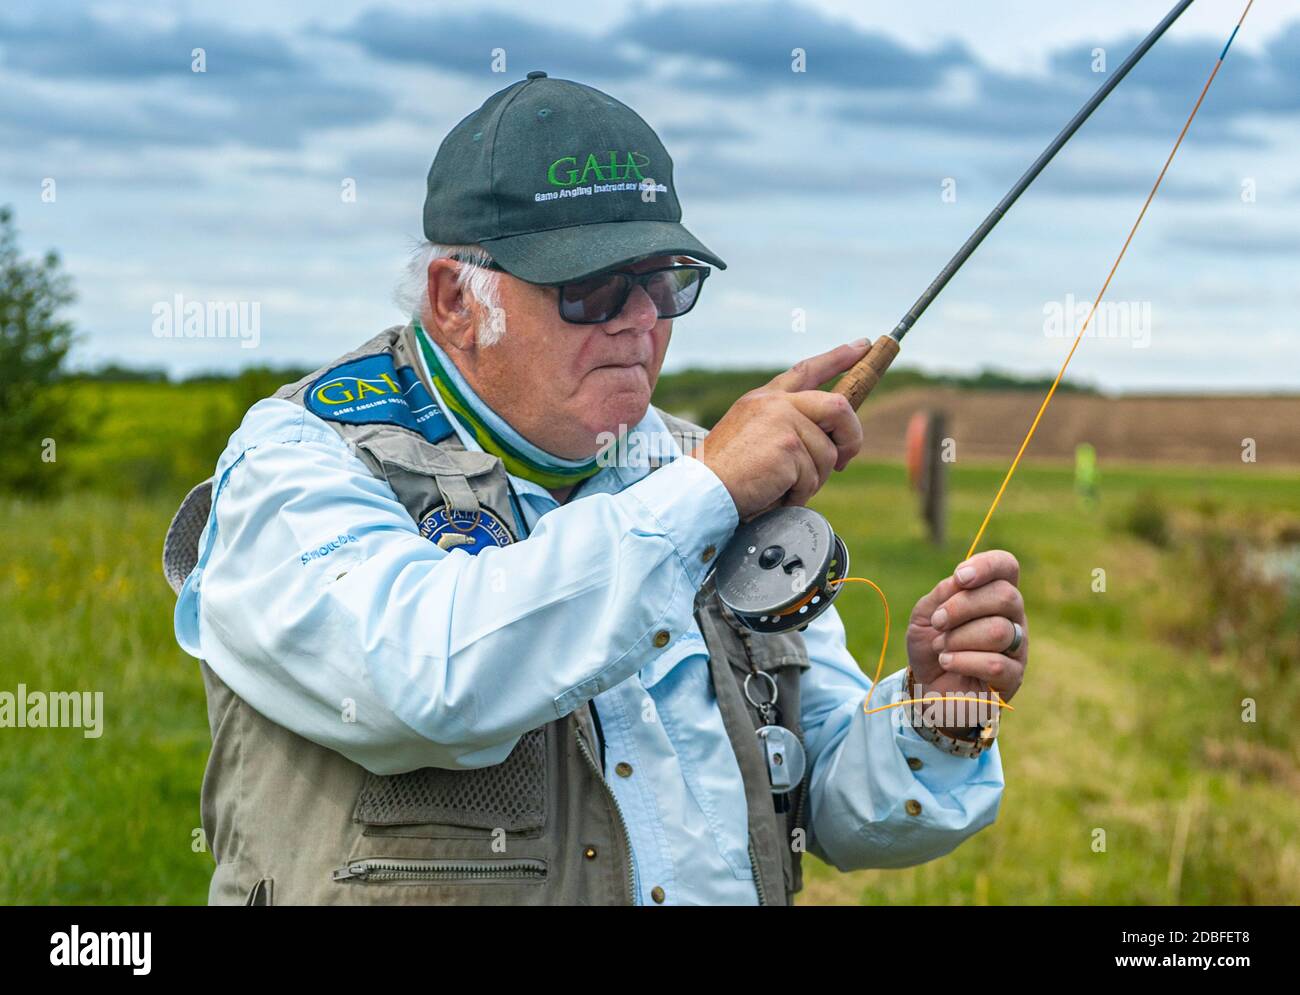 Lincolnshire, UK - Mr Barry Grantham, an instructor in fly fishing, casting a fly line across a trout lake for rainbow trout Stock Photo